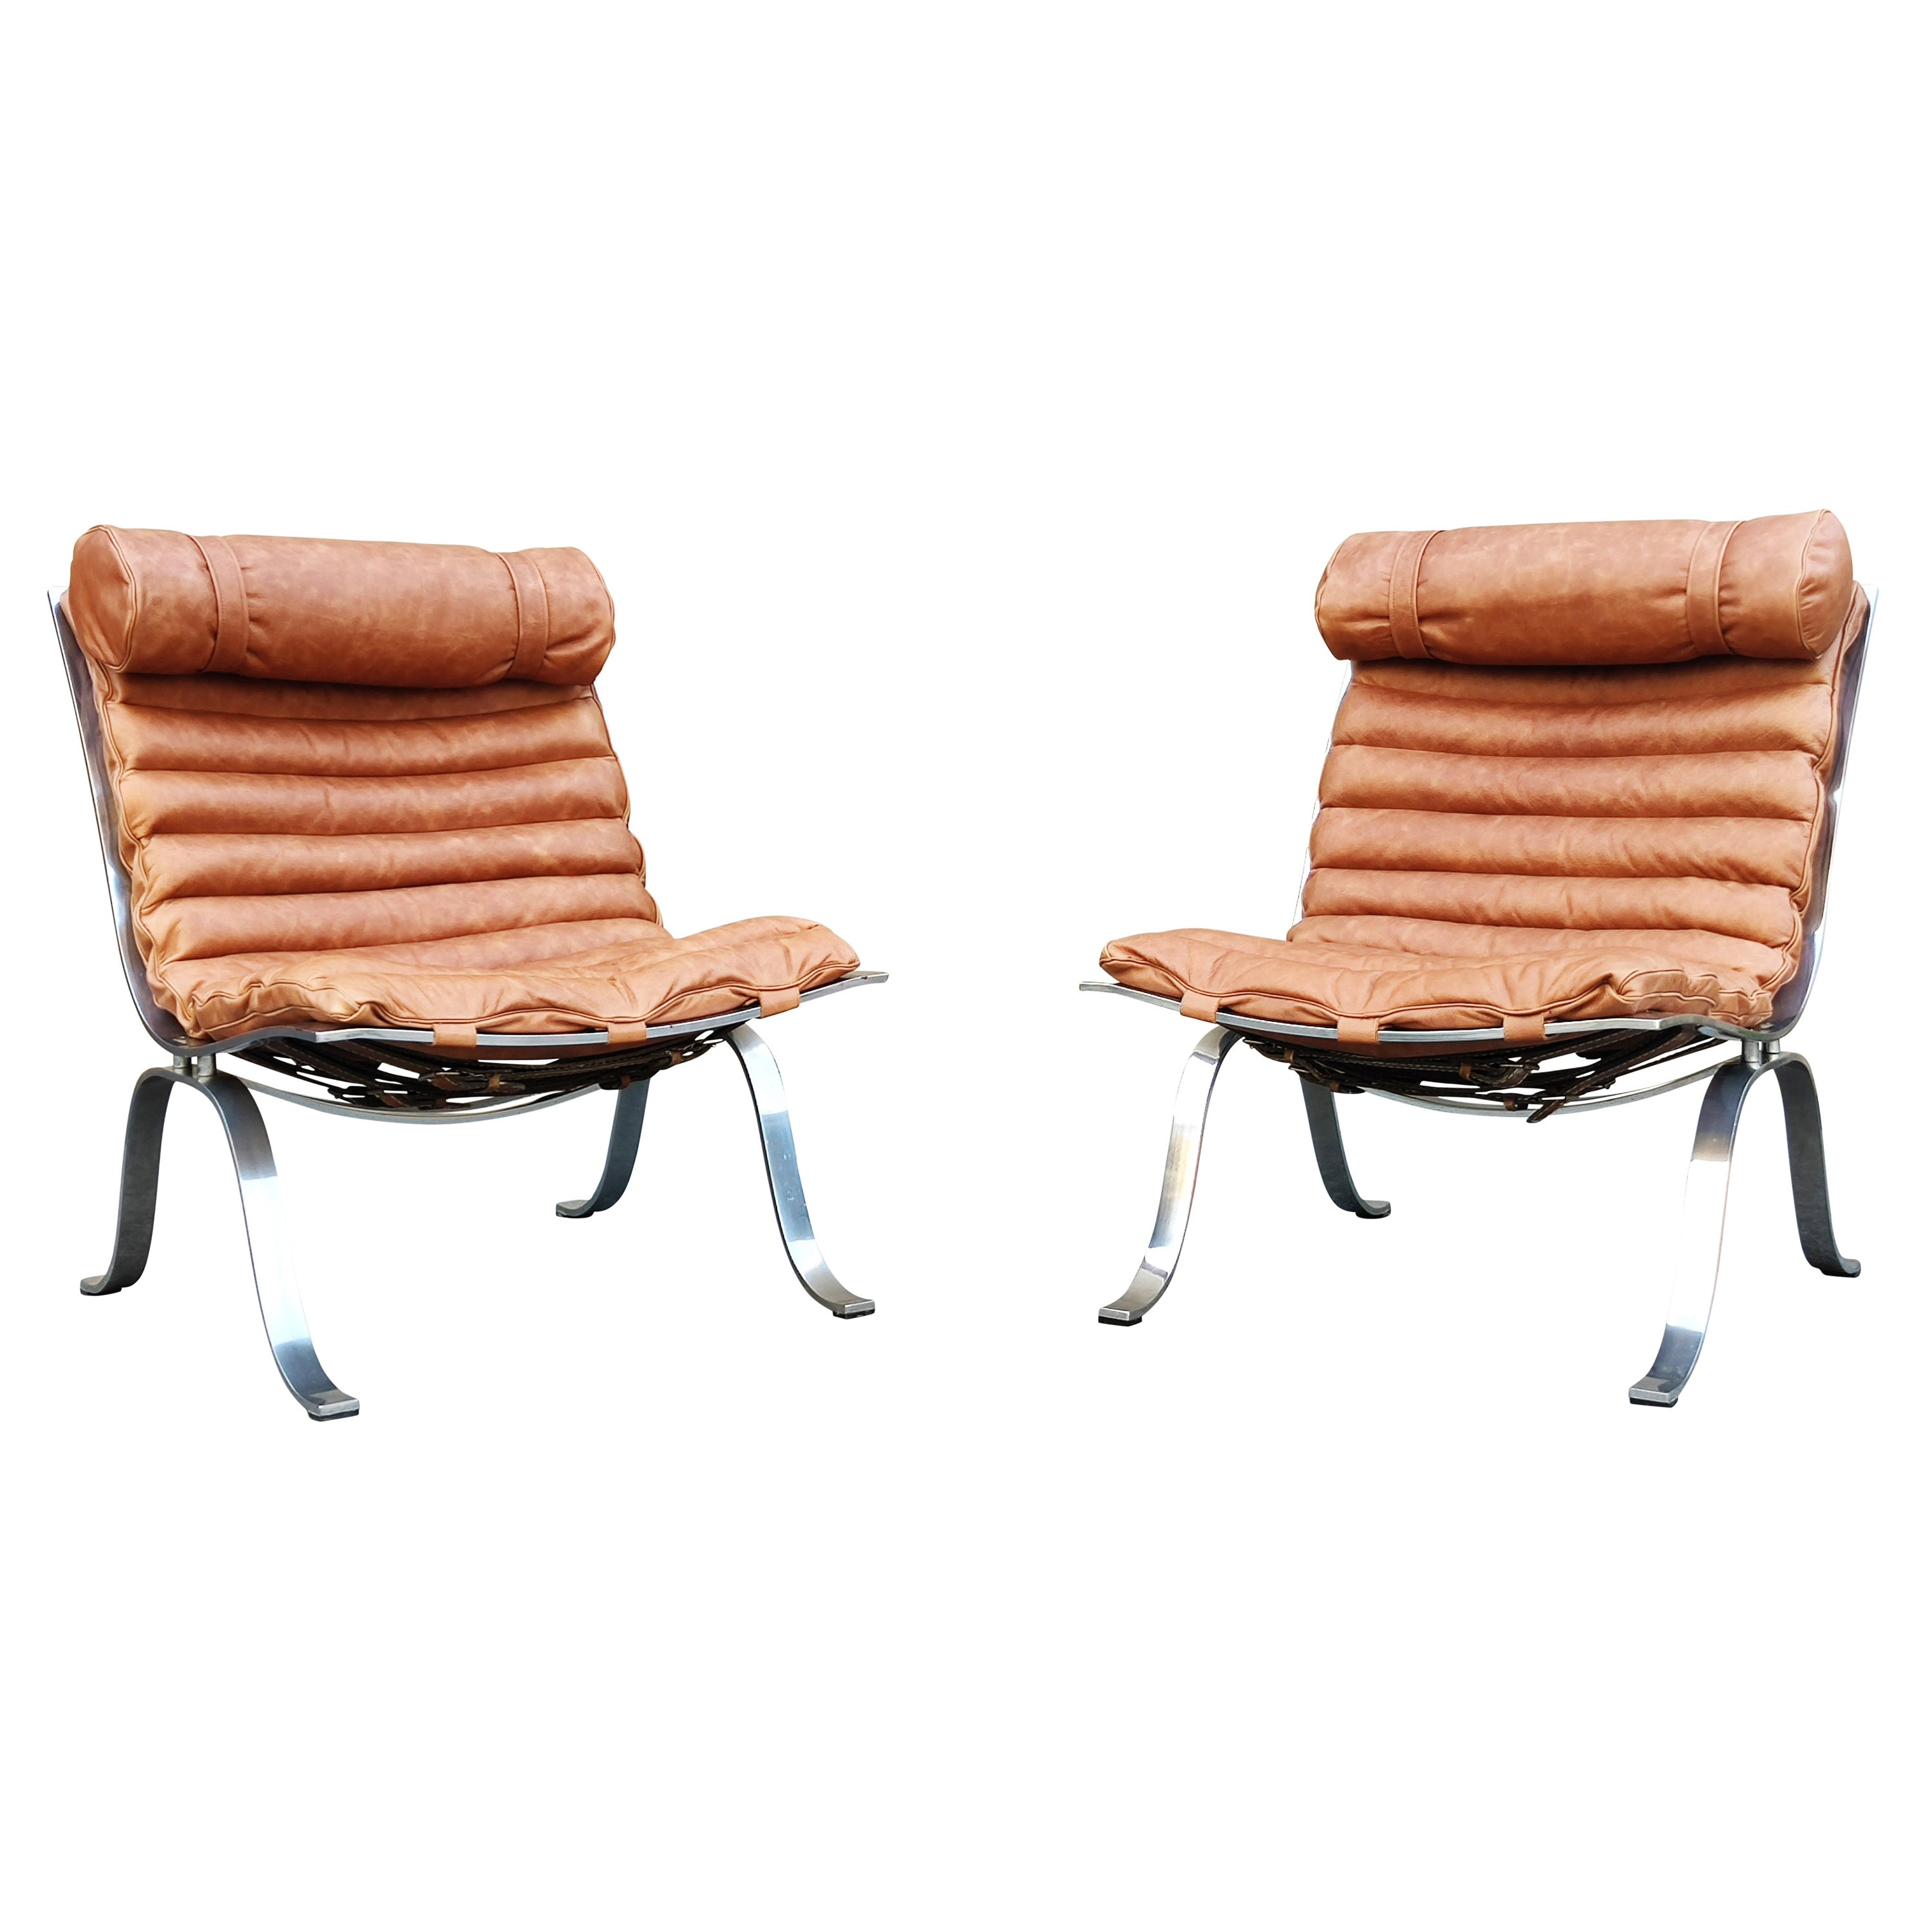 Pair of Arne Norell "Ari" Lounge Chairs Cognac Leather Chromed Steel